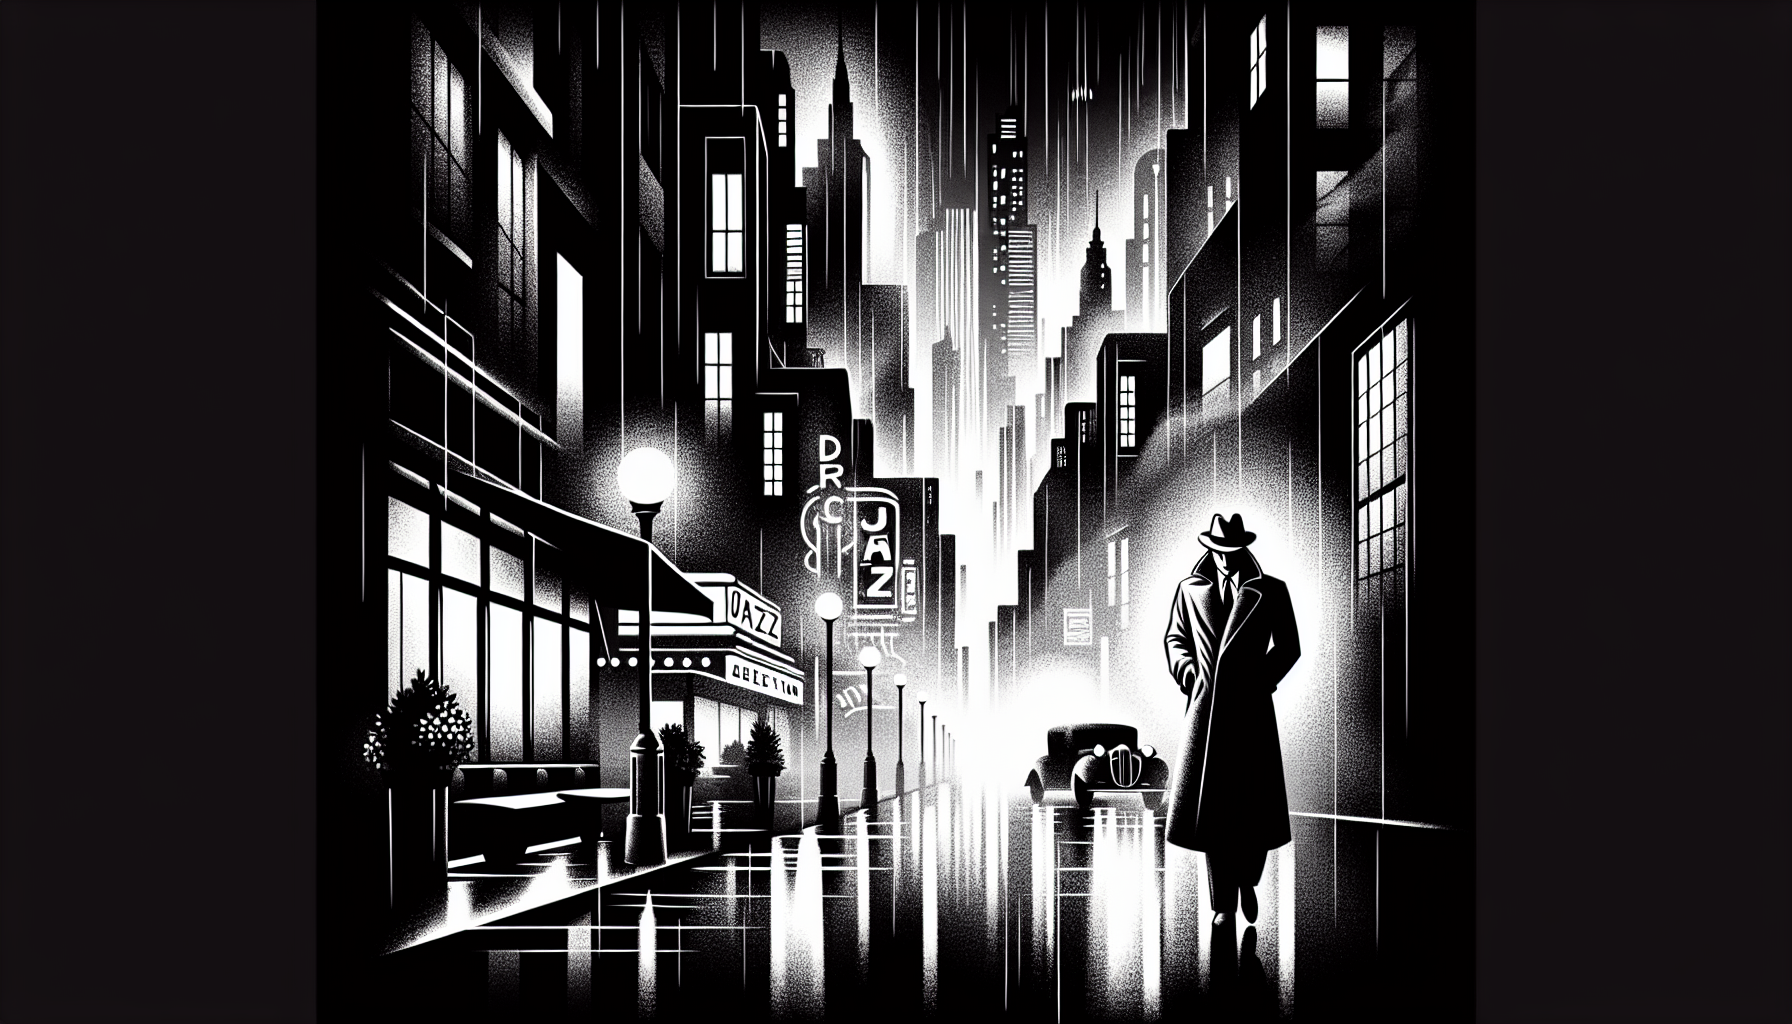 A shadowy, black-and-white cityscape at night, featuring a mysterious figure in a trench coat and fedora, obscured in mist, with rain-slicked streets reflecting neon lights from a distant, smoky jazz